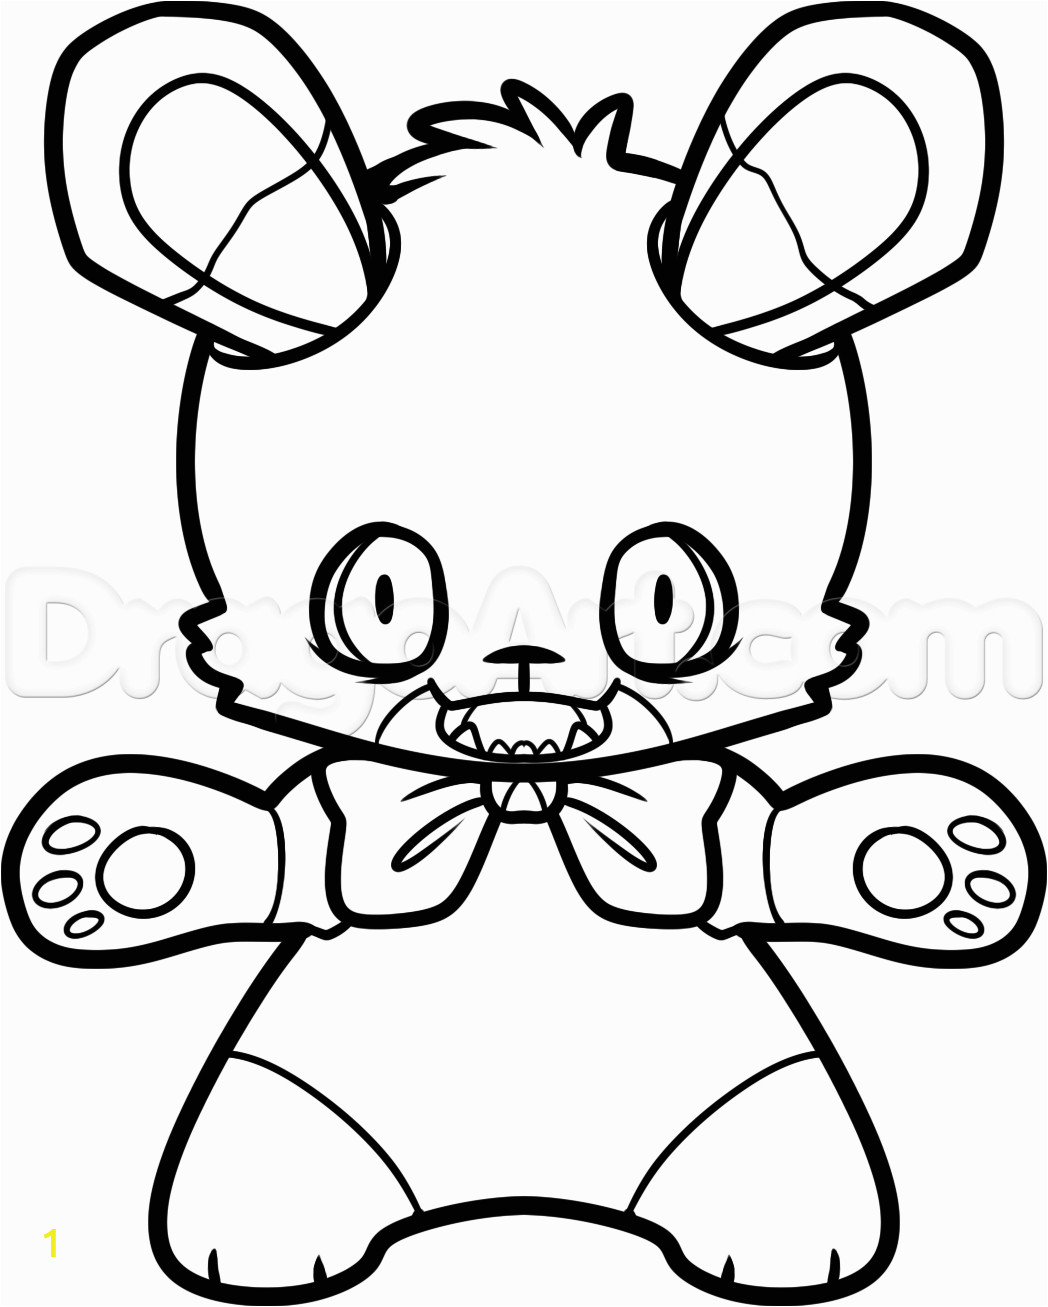 Five Nights at Freddy S Bonnie Coloring Pages How to Draw Bonnie From Five Nights at Freddys Step 9